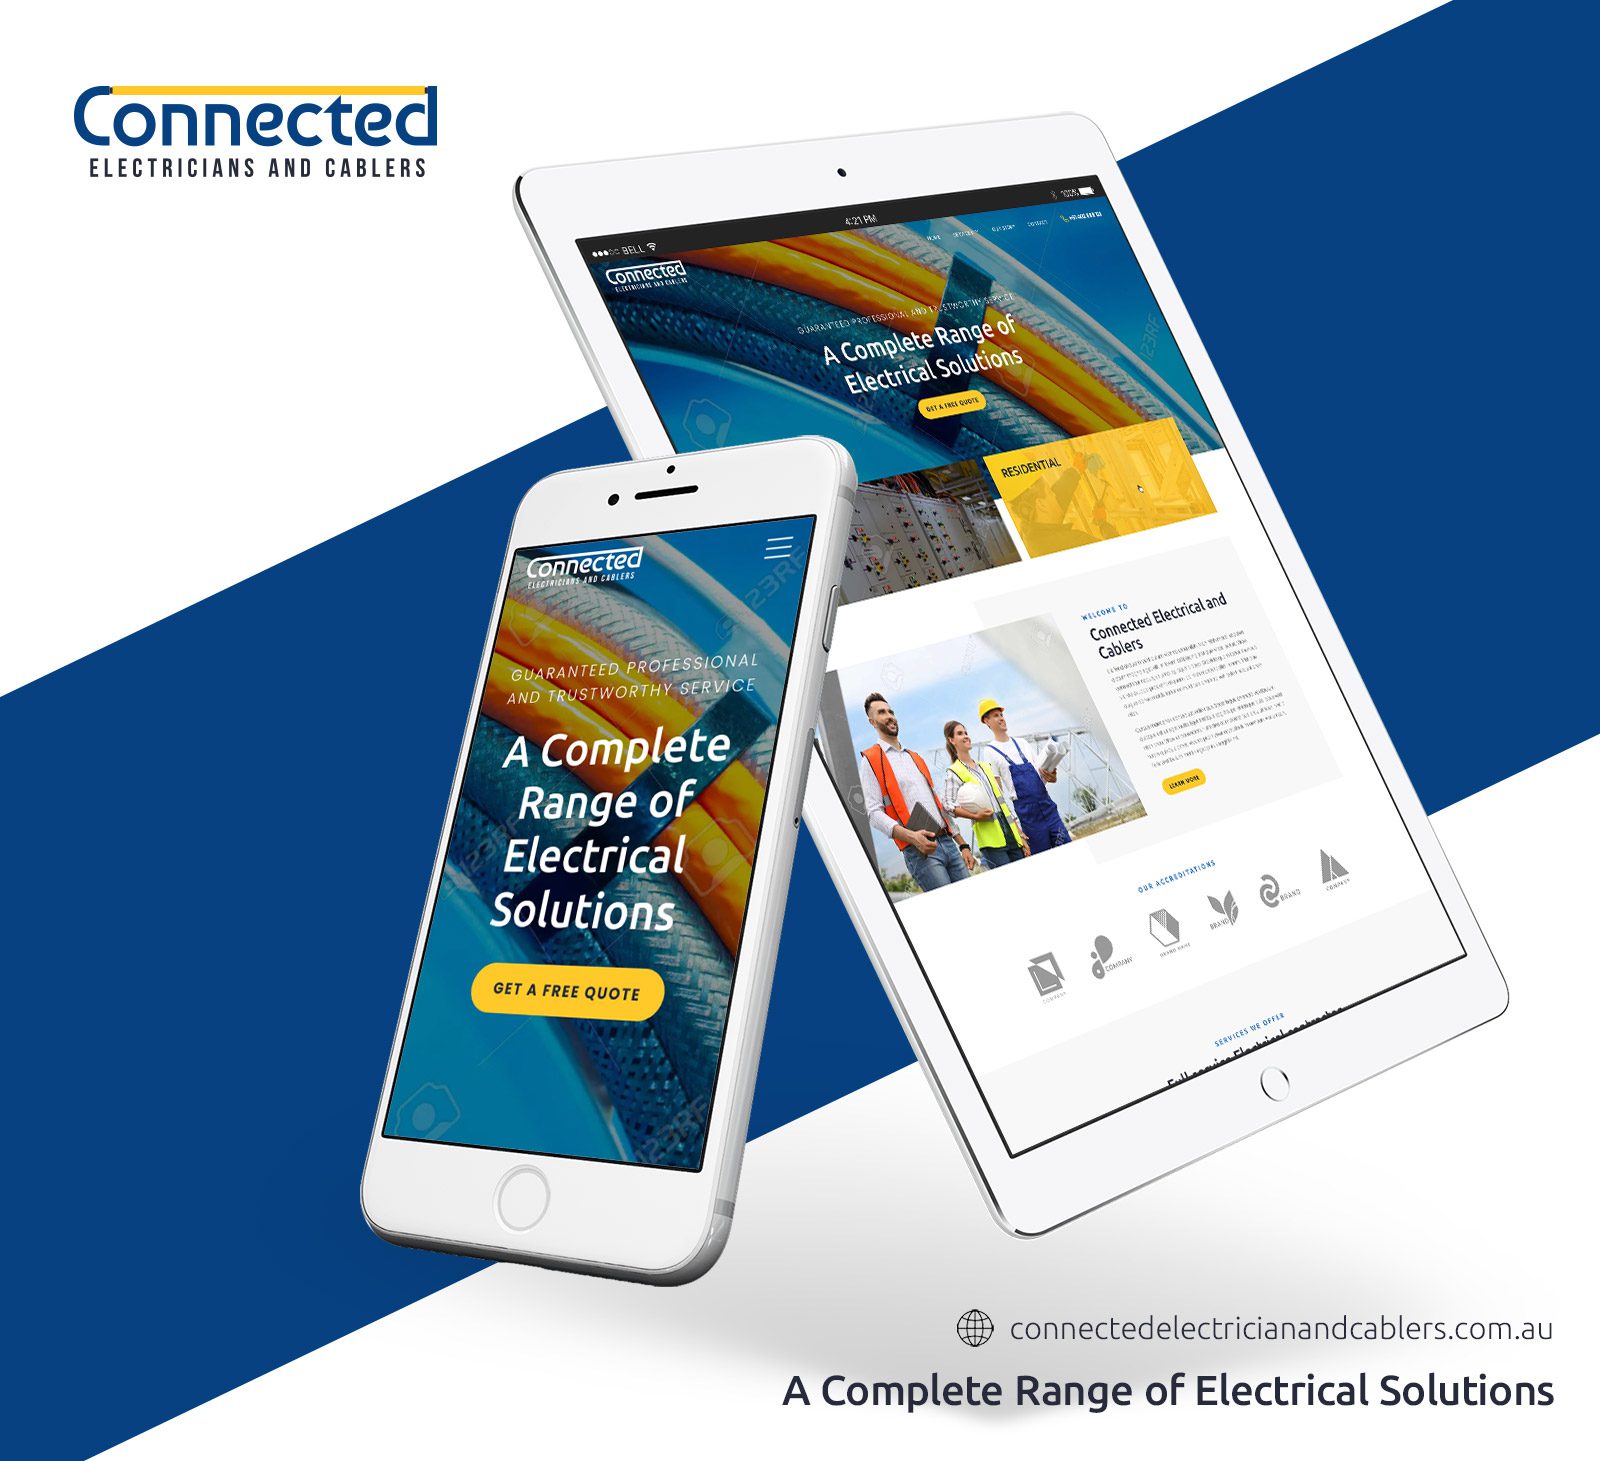 Connected Electricians and Cablers Mobile Presenter